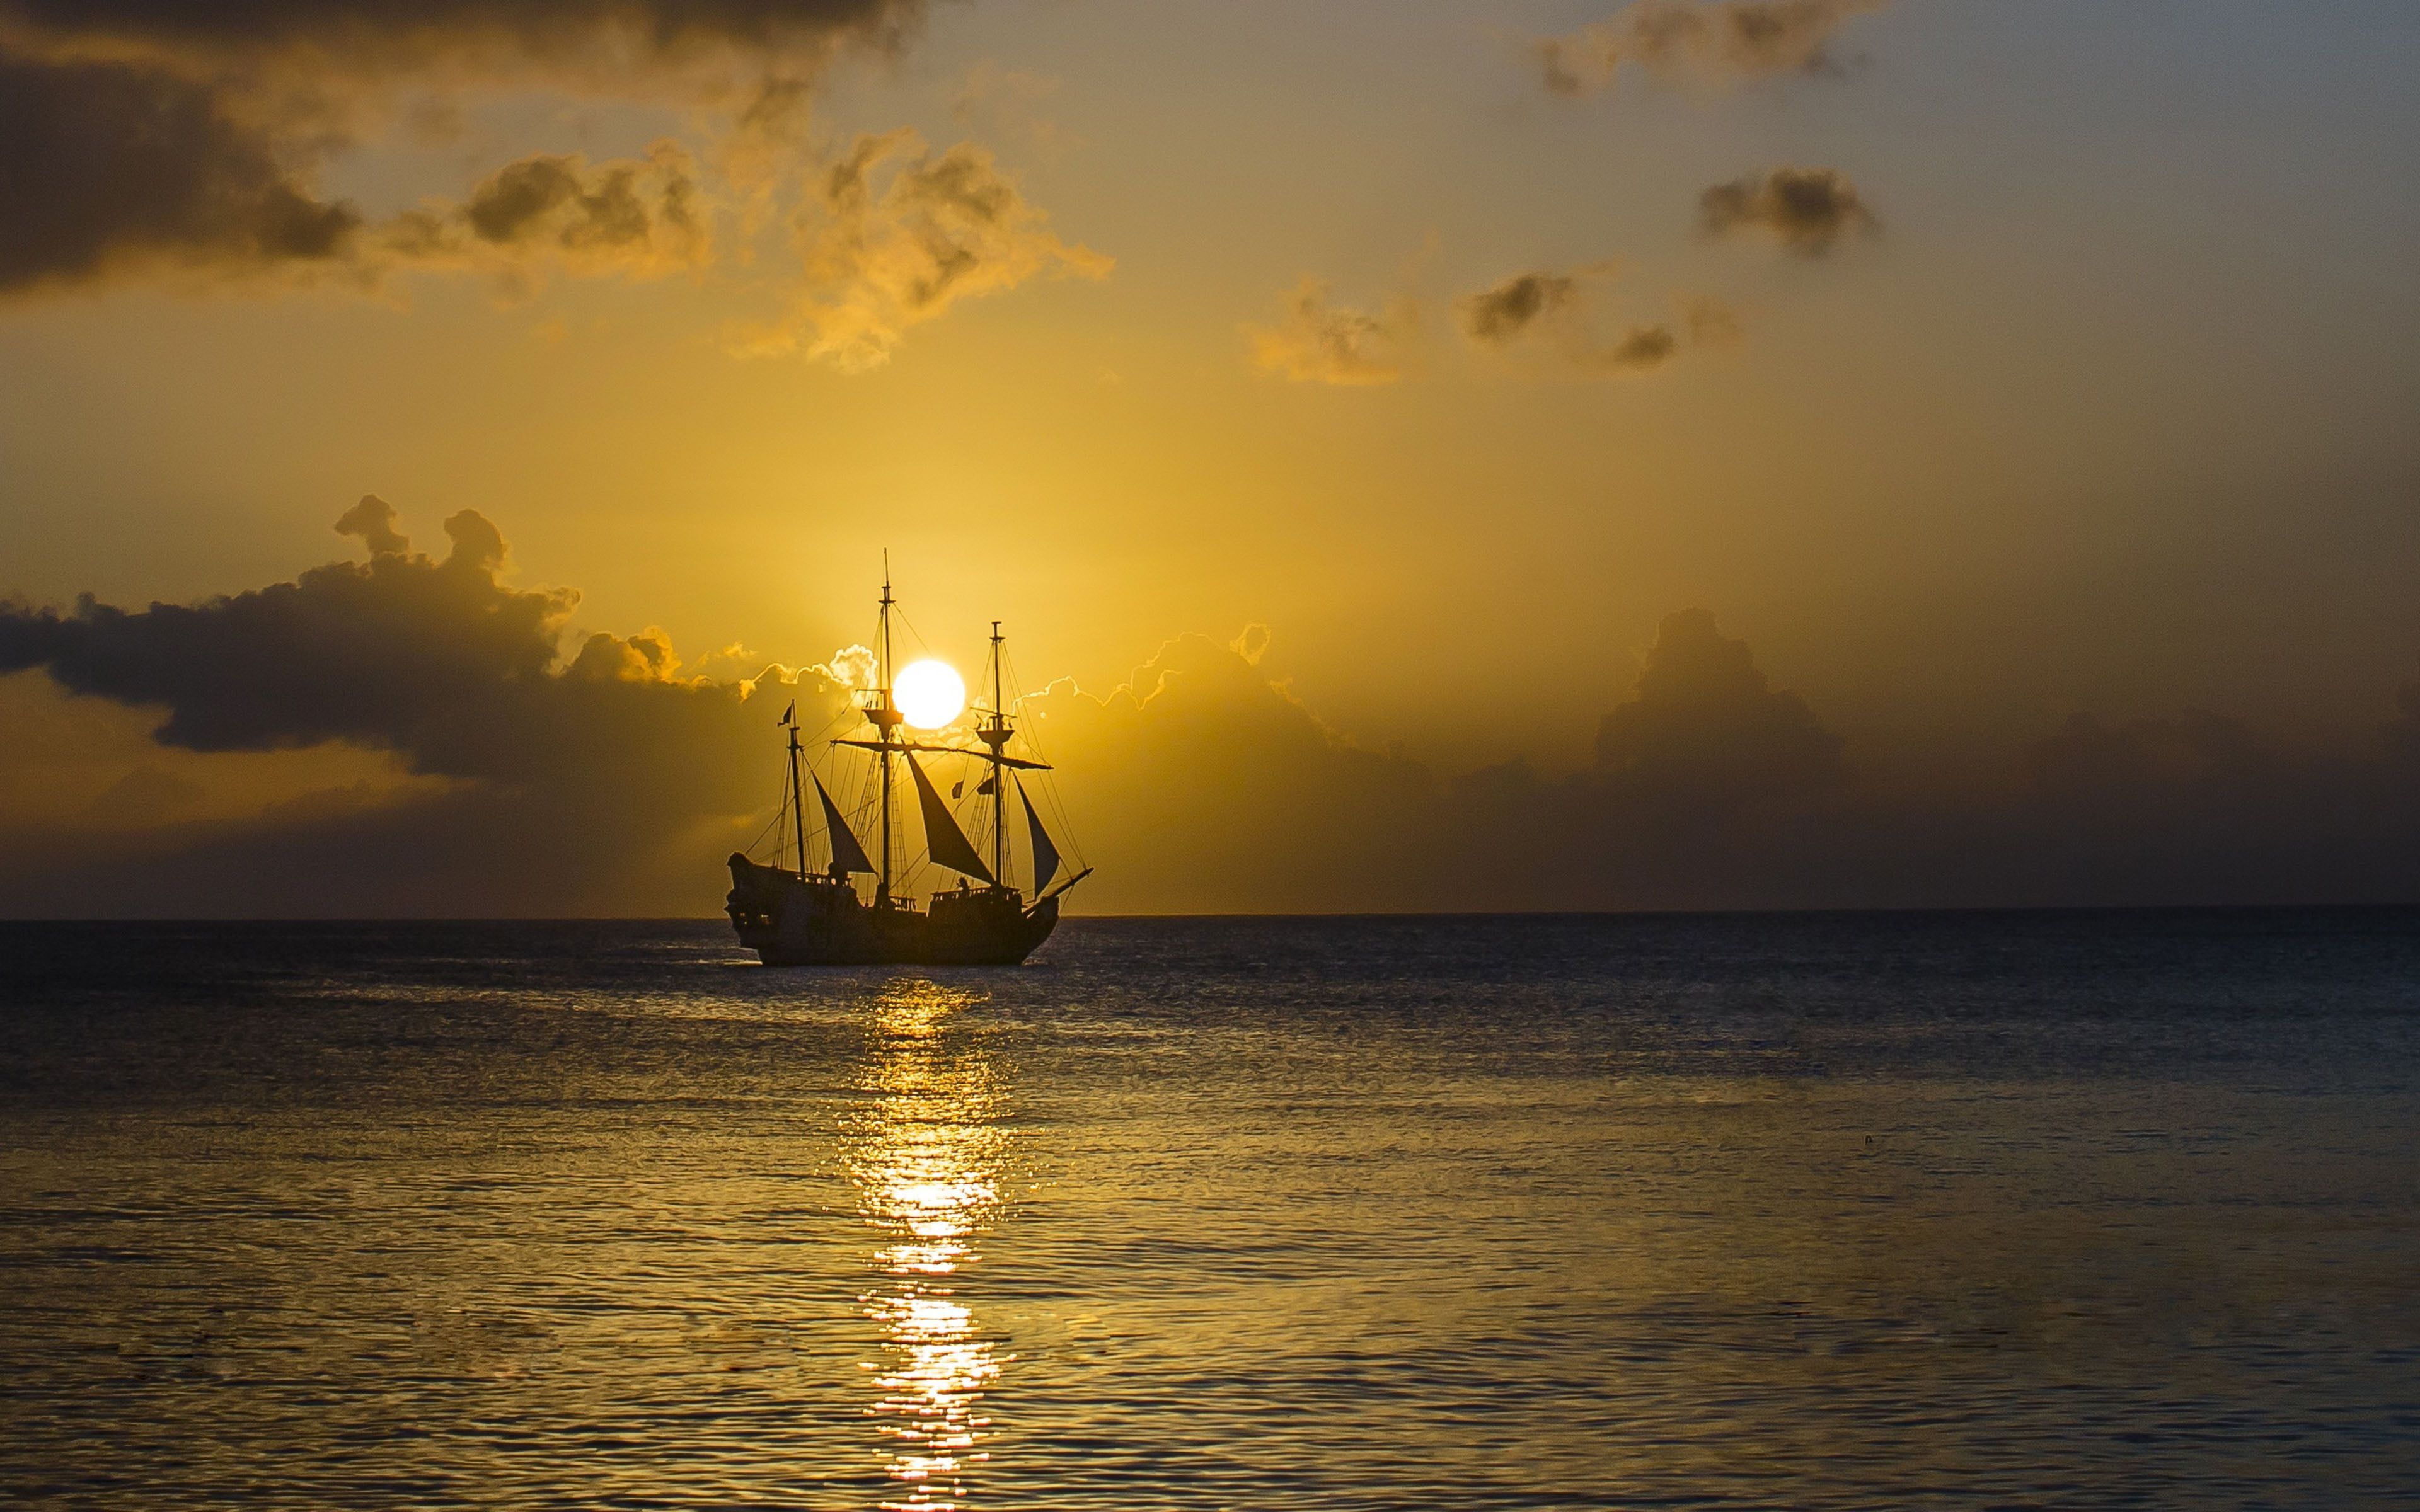 Gold Sunset Ocean Old Pirate Ship With Sail Sky 4k Ultra HD Wallpaper For Desktop Mobile And Computer 3840×2400 K. Gold sunset, HD wallpaper, Desktop wallpaper